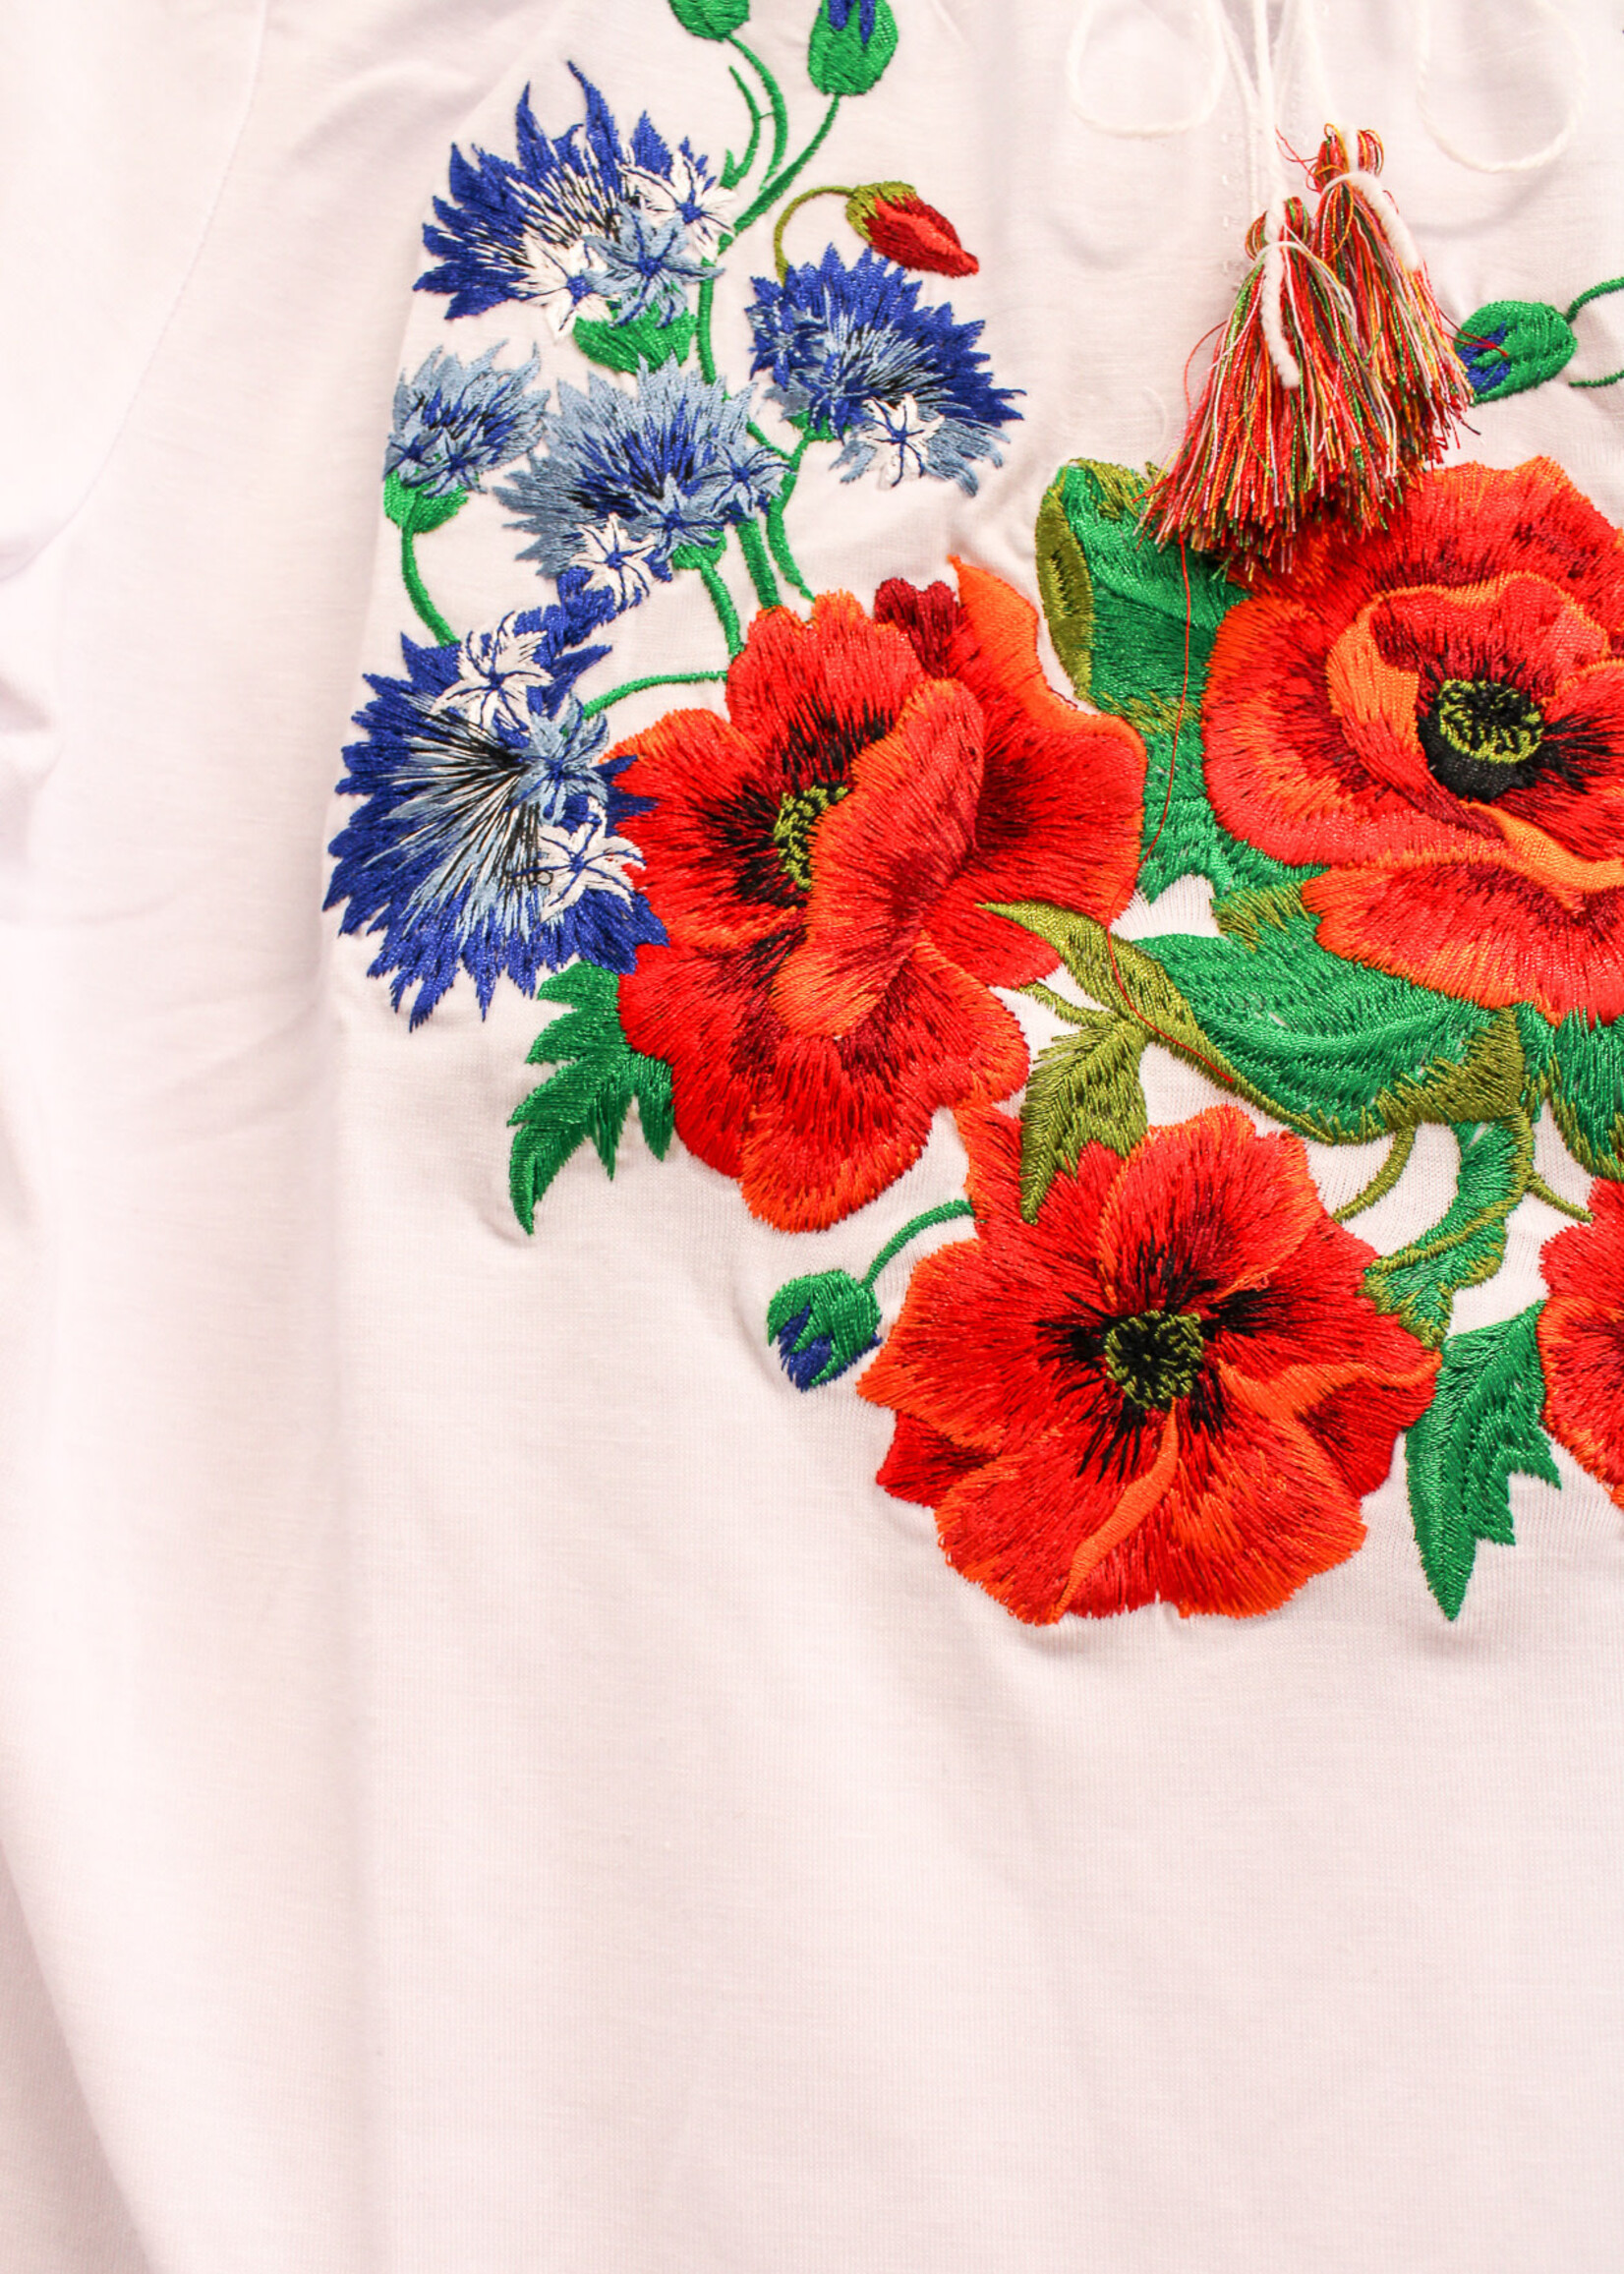 APPAREL -TSHIRT - (W) Poppies and Blue Flowers